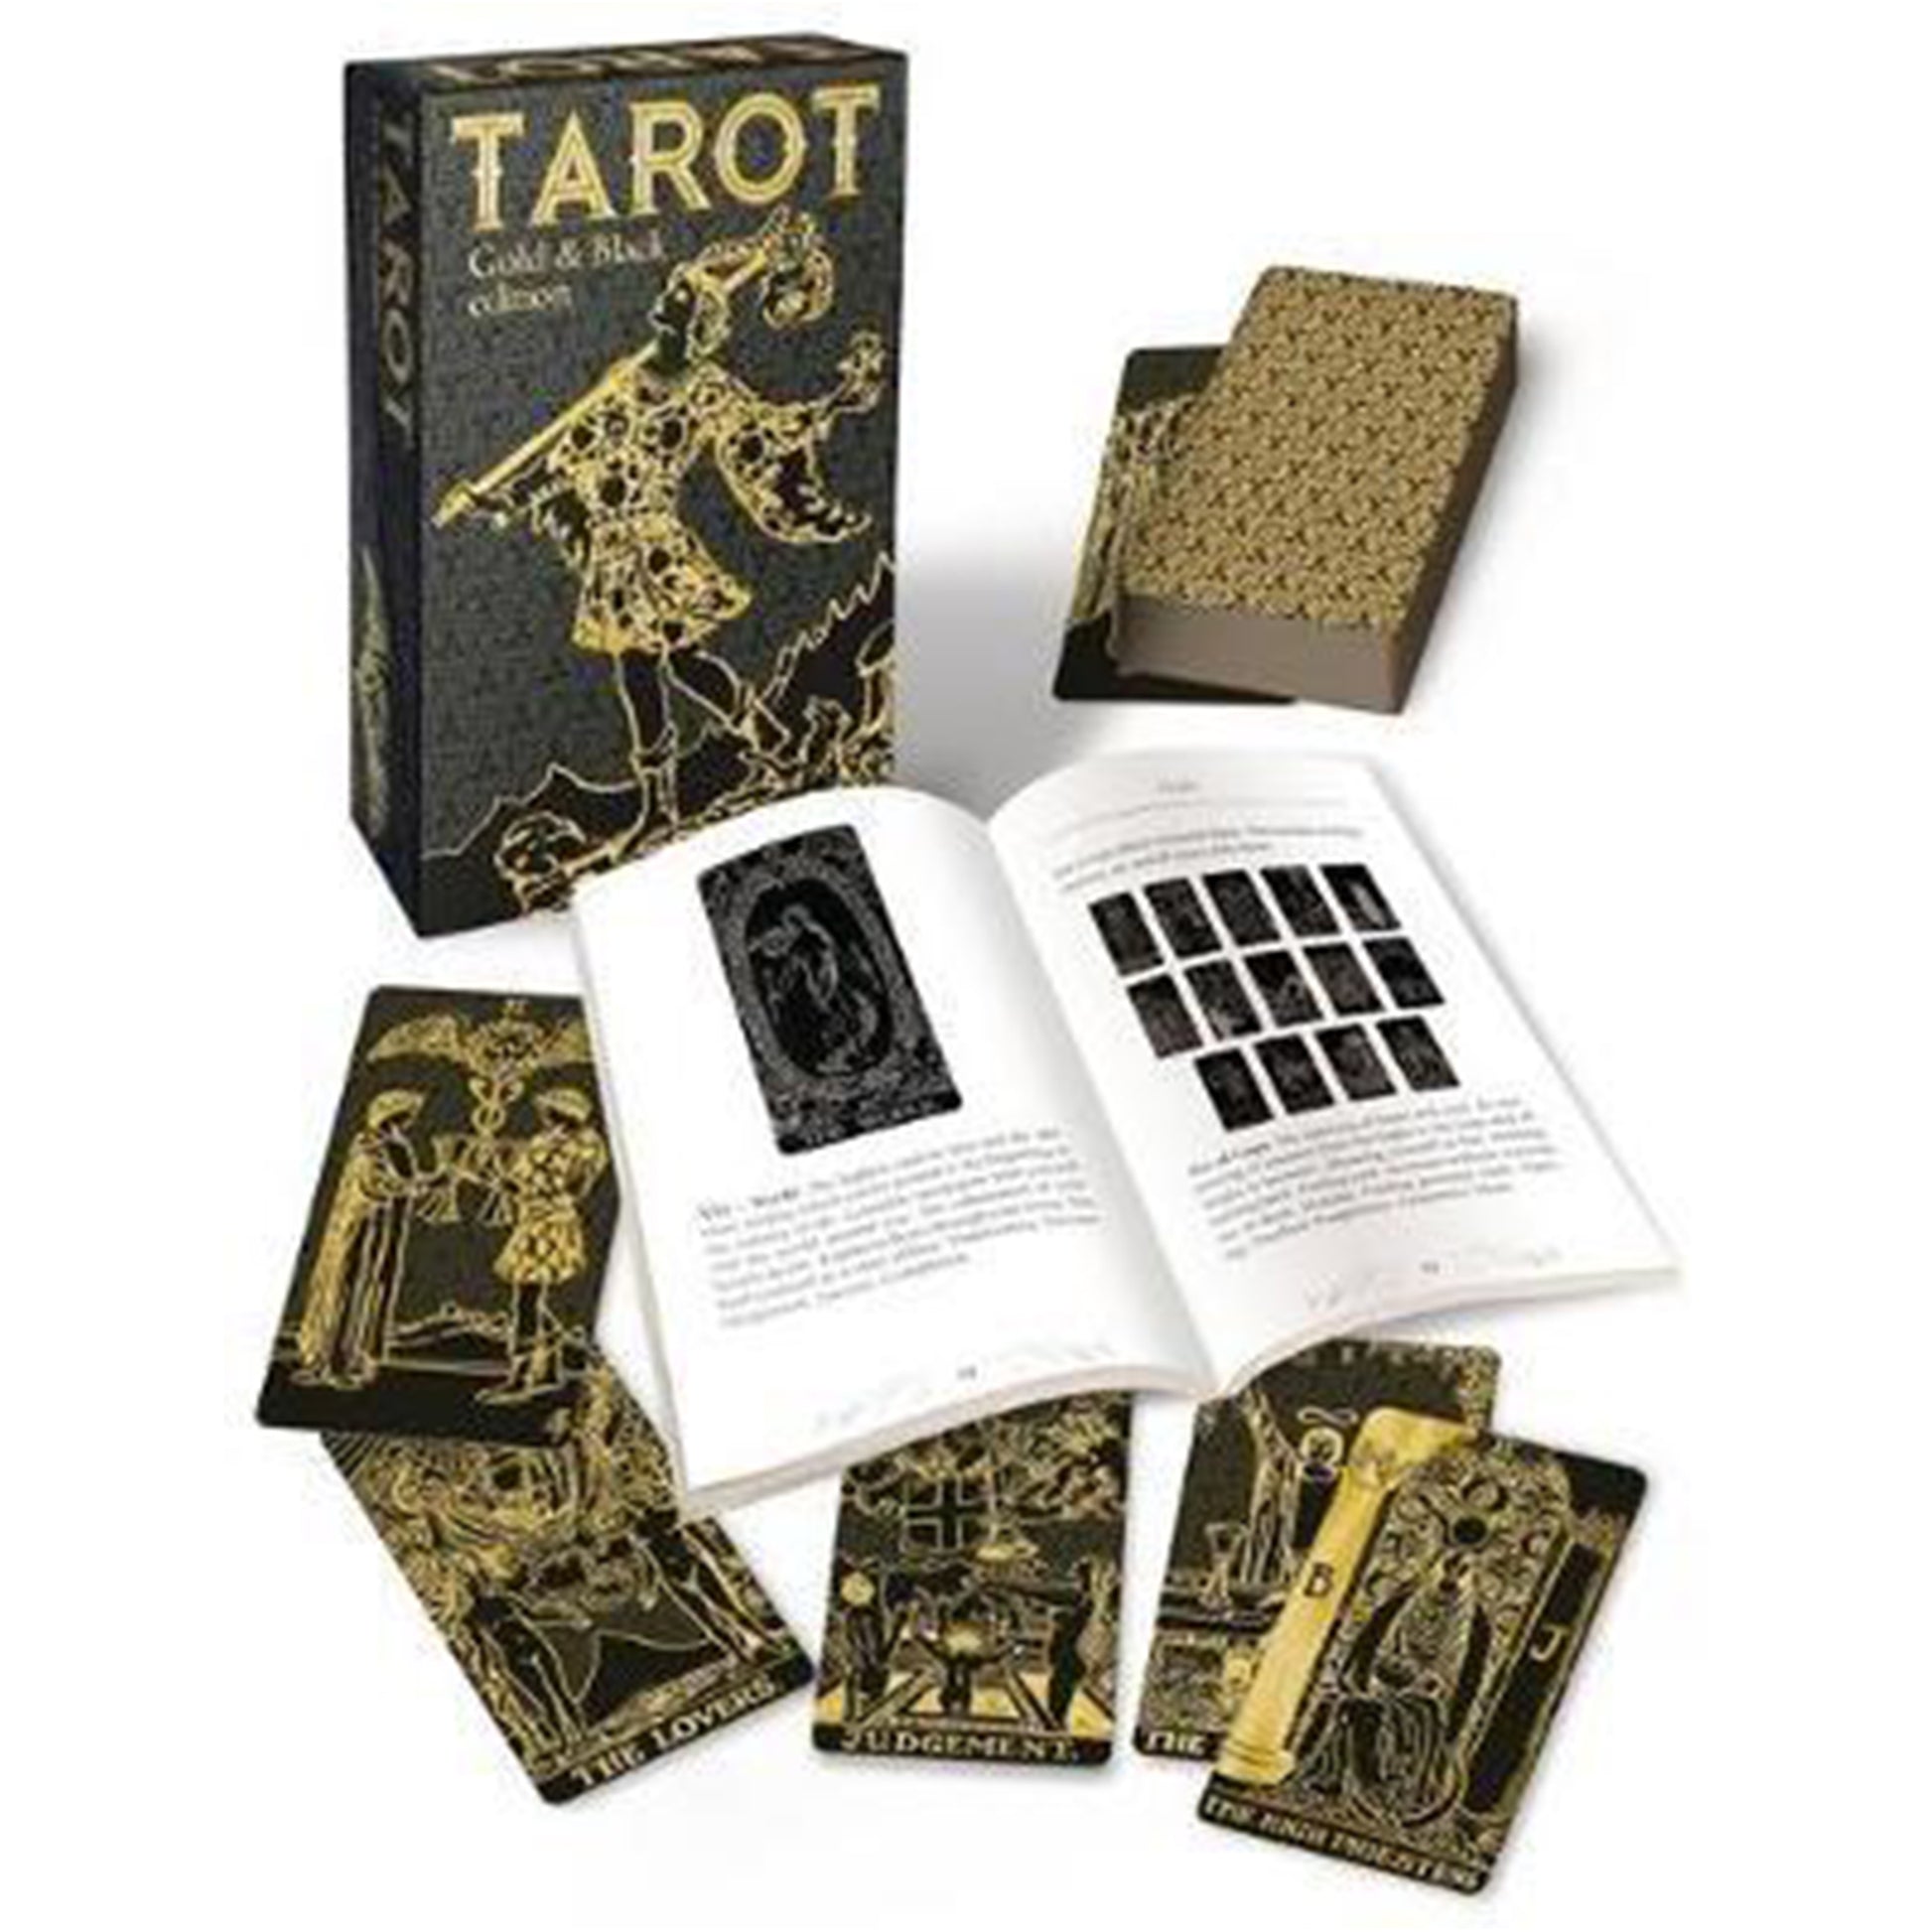 Tarot: Gold and Black Edition - Gold Foil deck Box, Book and Card Examples | Happy Piranha